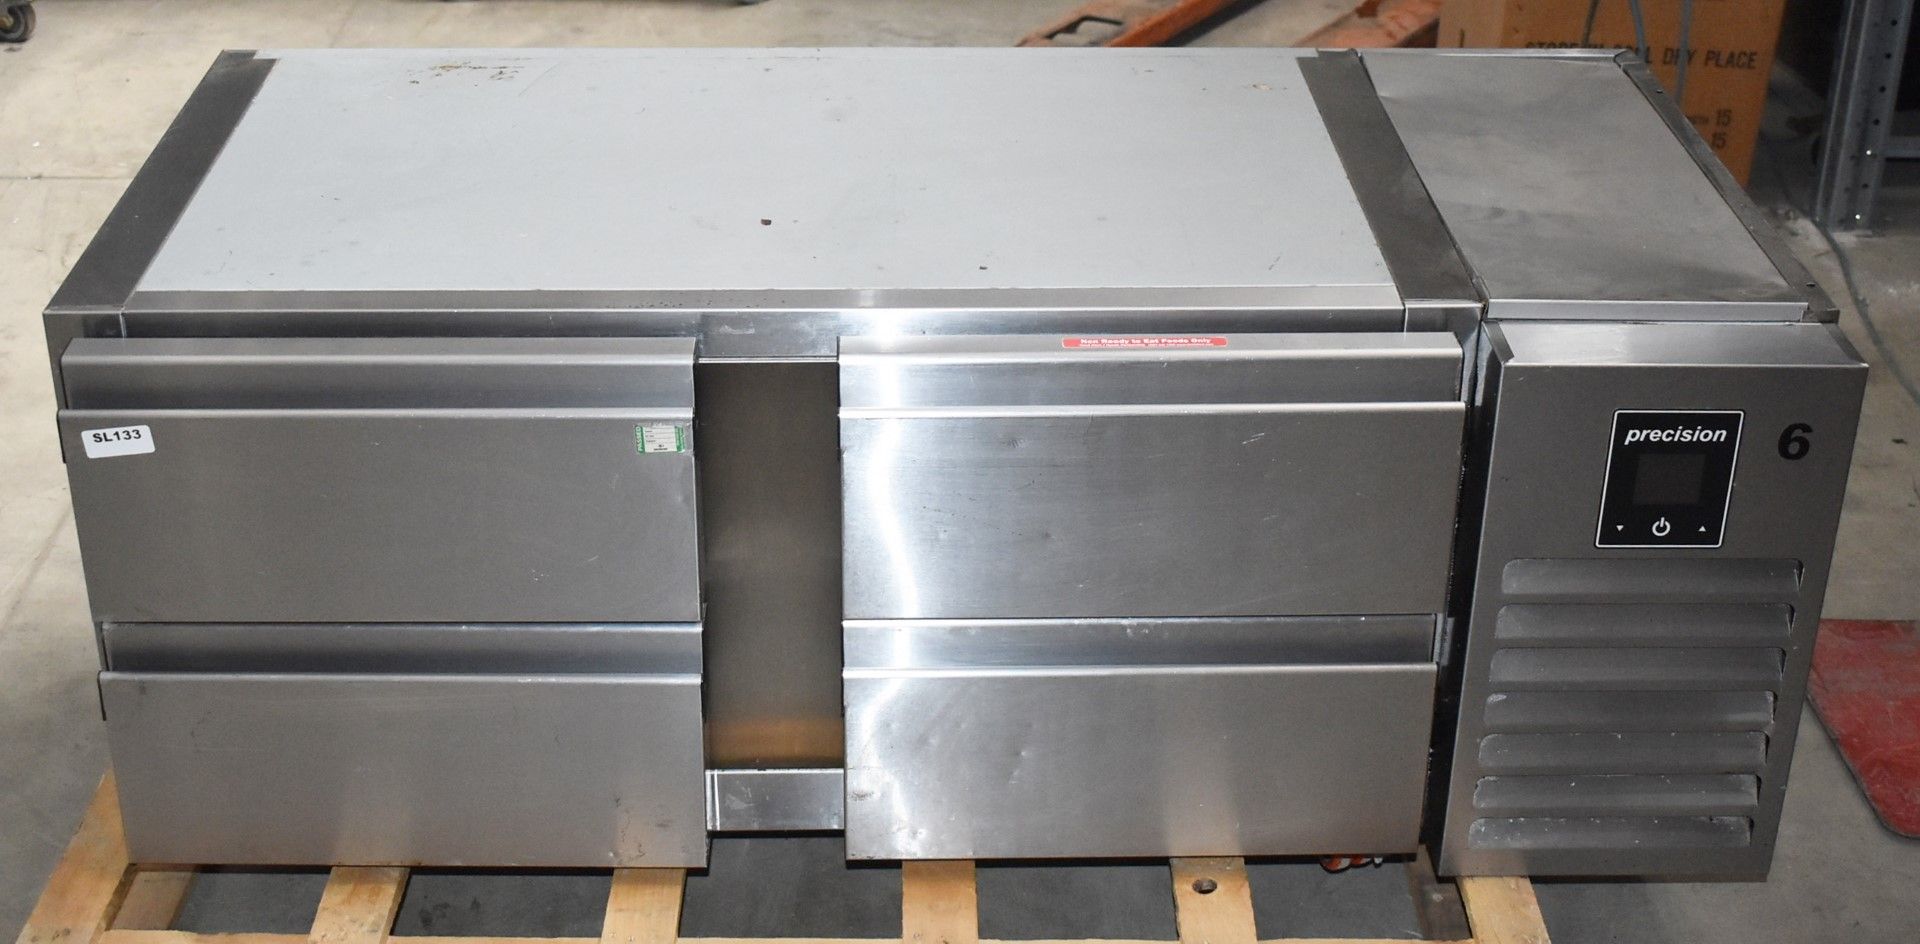 1 x Precision HUBC 411 Stainless Steel Under Broiler Counter Refrigerator - Recently Removed From - Image 2 of 9